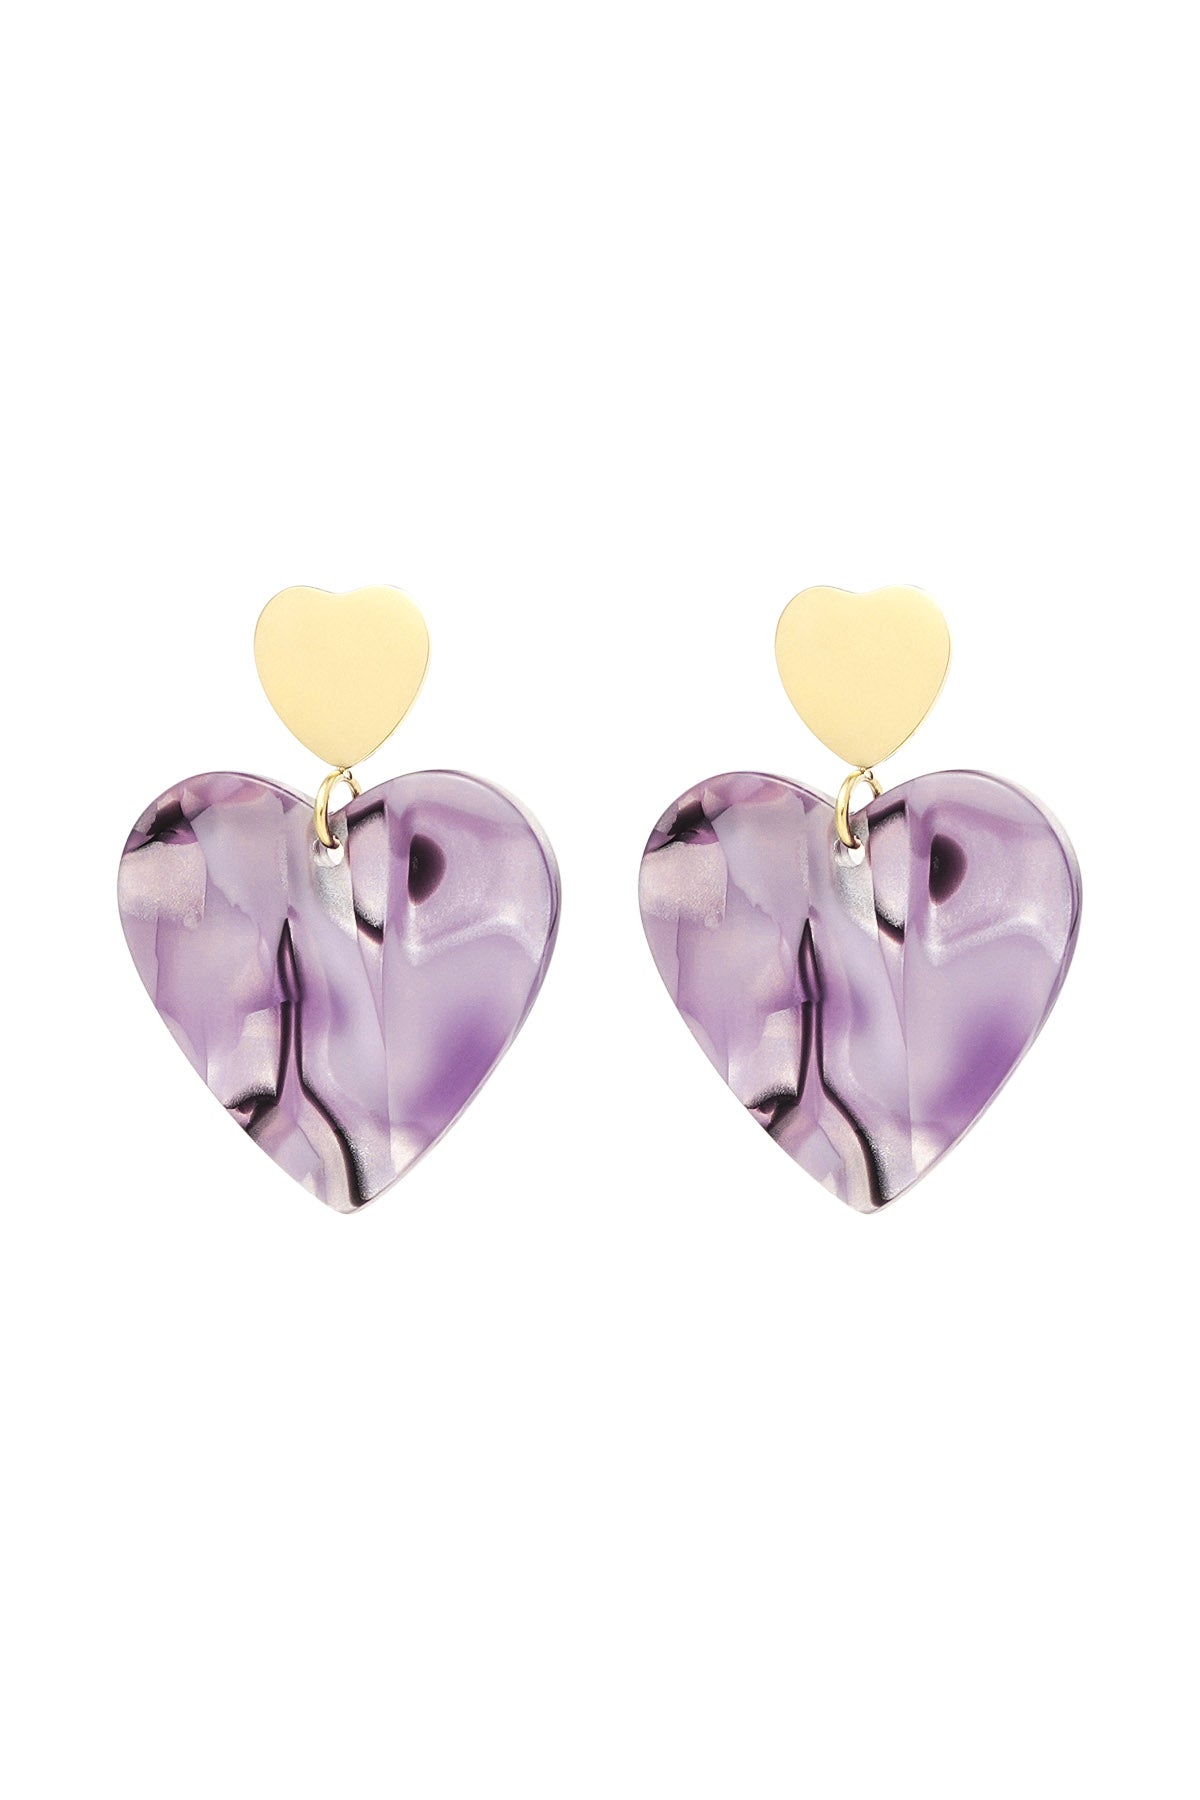 Thunder Egg - Double Heart Earrings in Gold and Purple